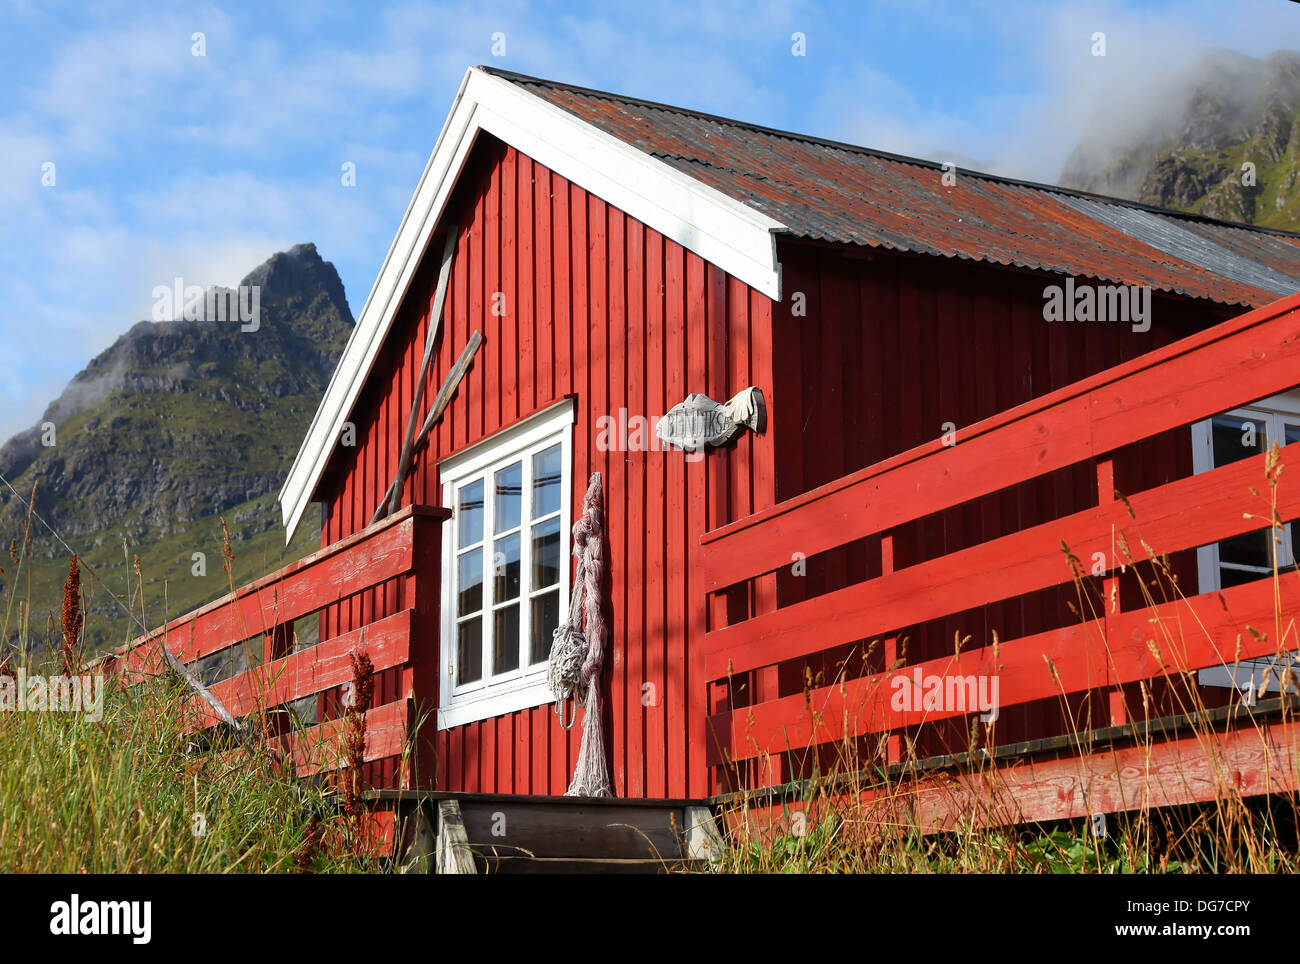 Rorbuer, Fishermans home, today used as holiday homes in the small village of Aa on the Lofoten Island Moskenesoeya  Norway, Stock Photo